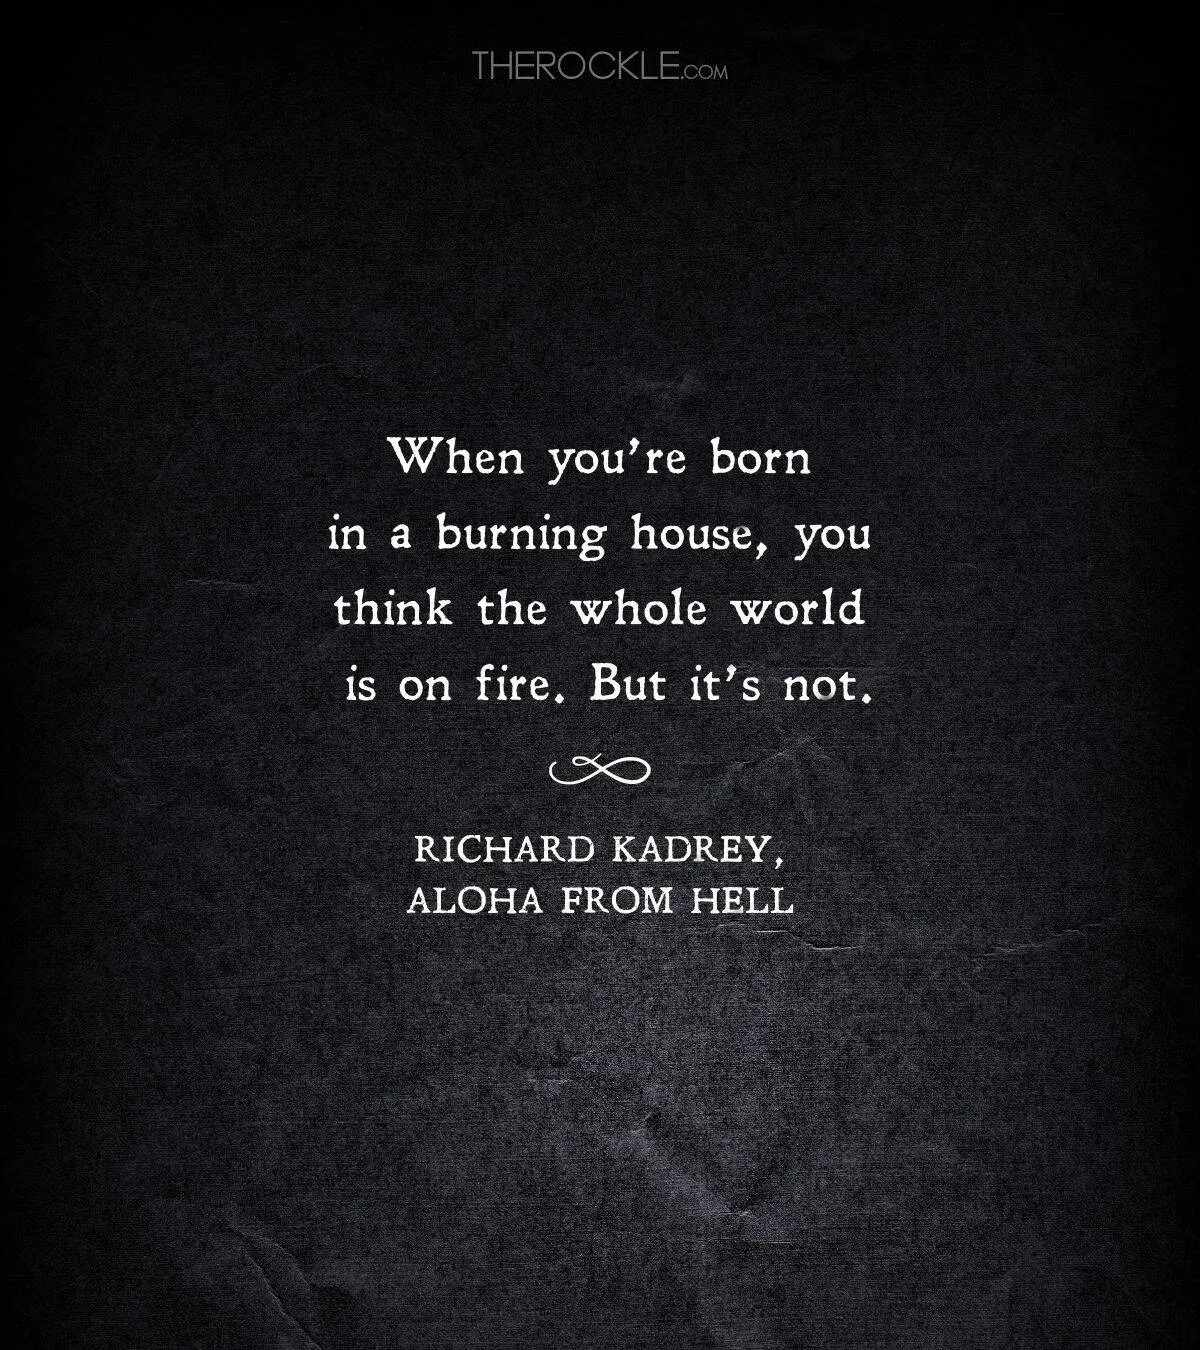 Richard Kadrey quote from Aloha from Hell